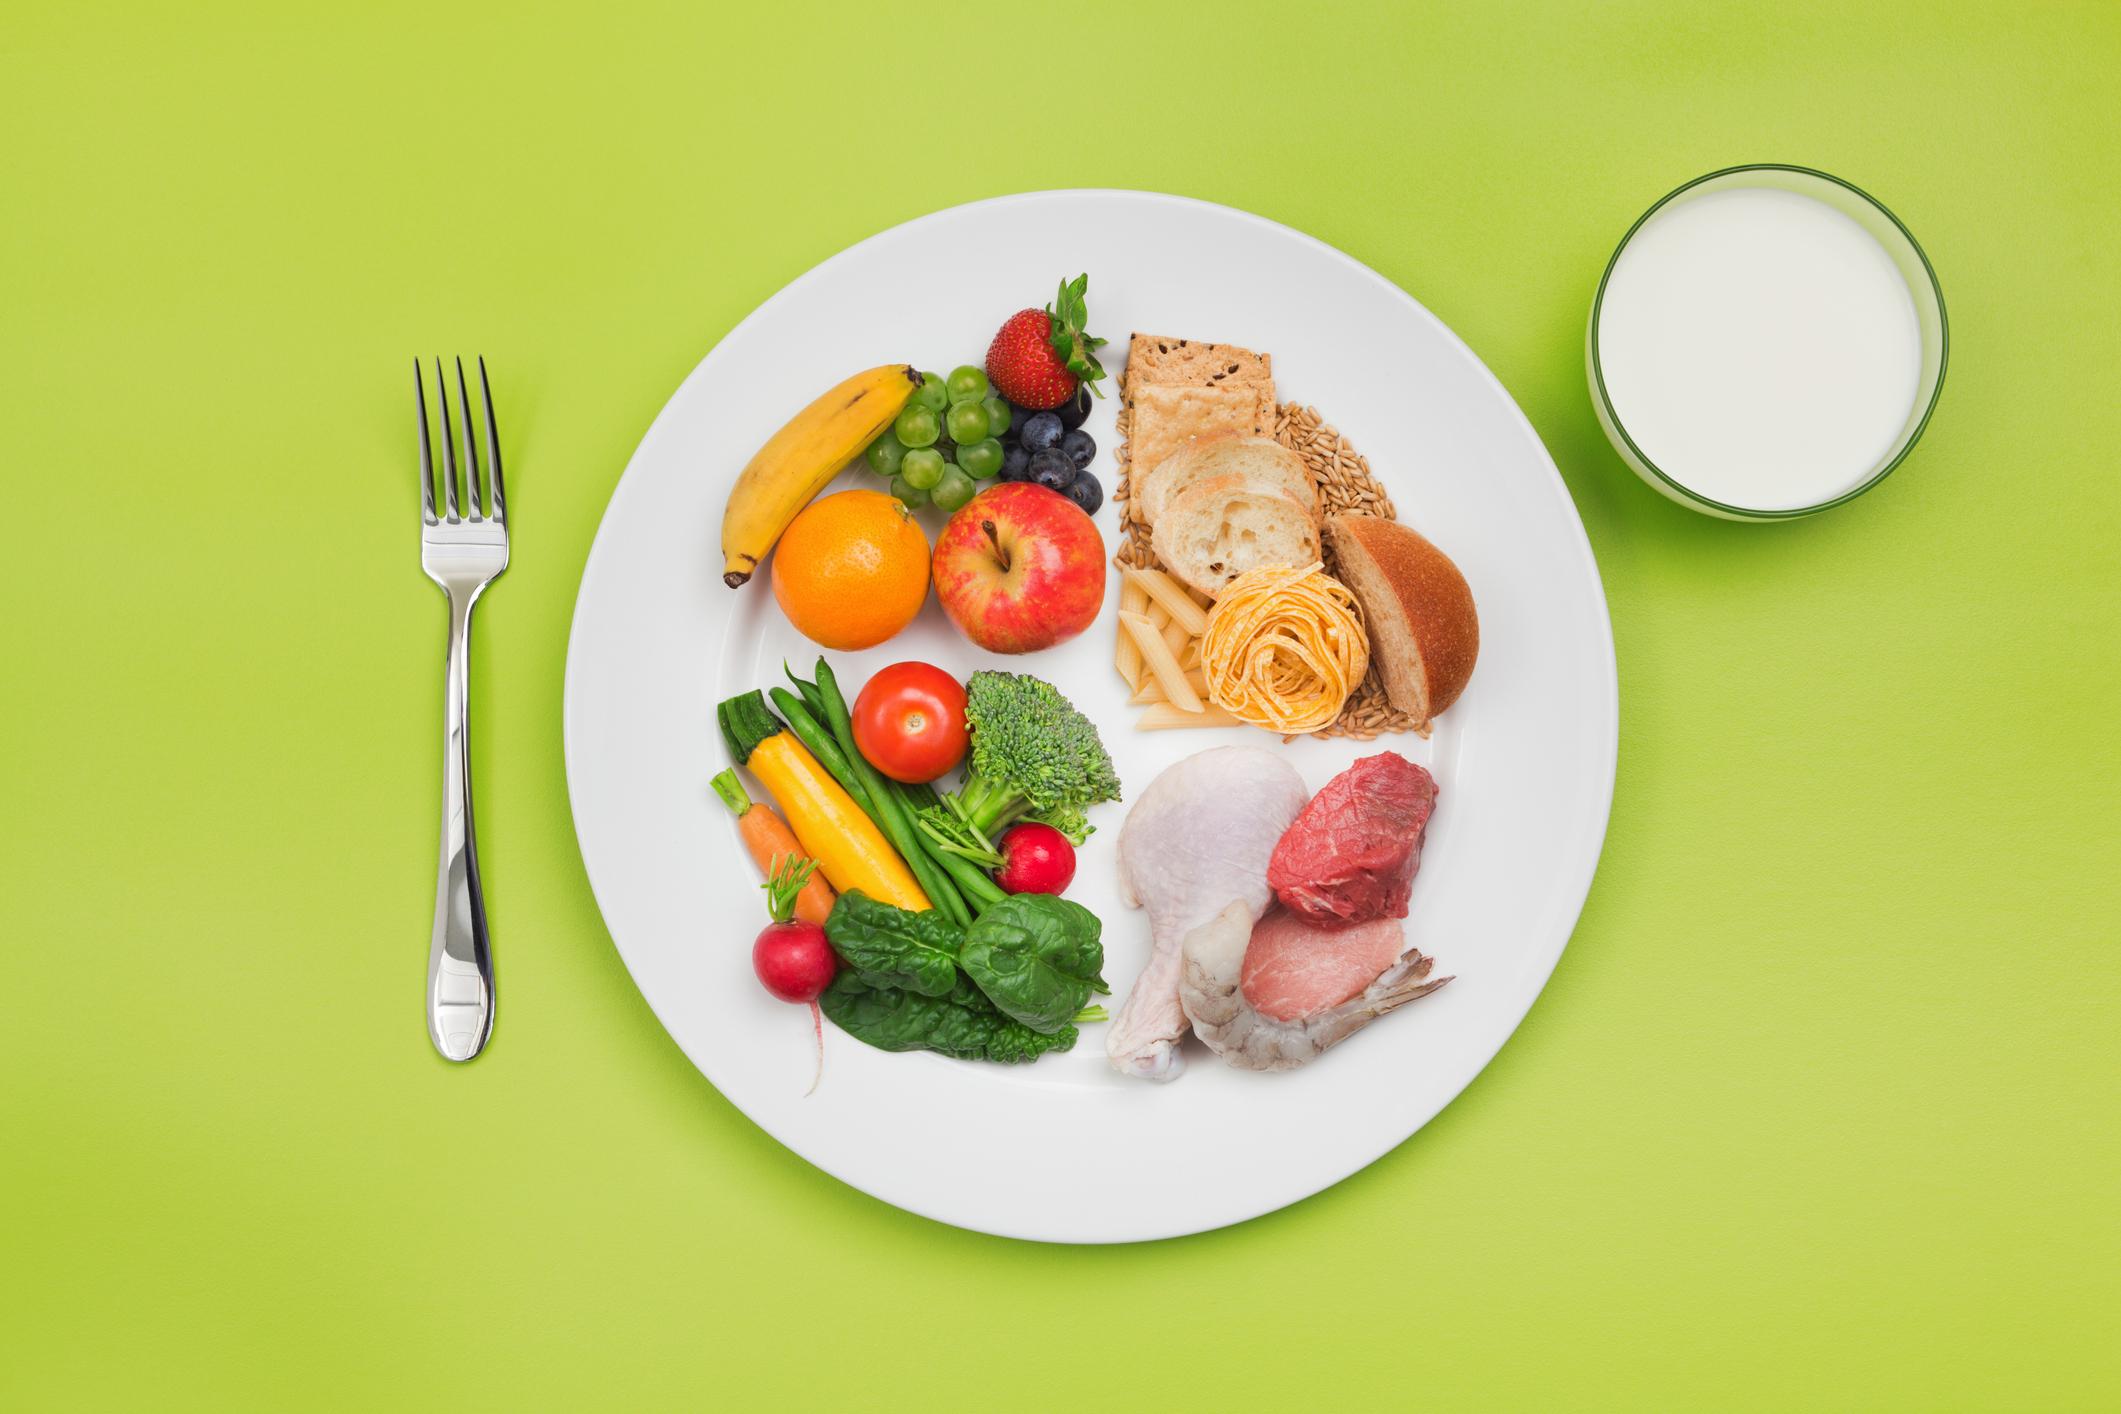 image of plate with food groups labeled, including veggies, fruits, proteins and grains.